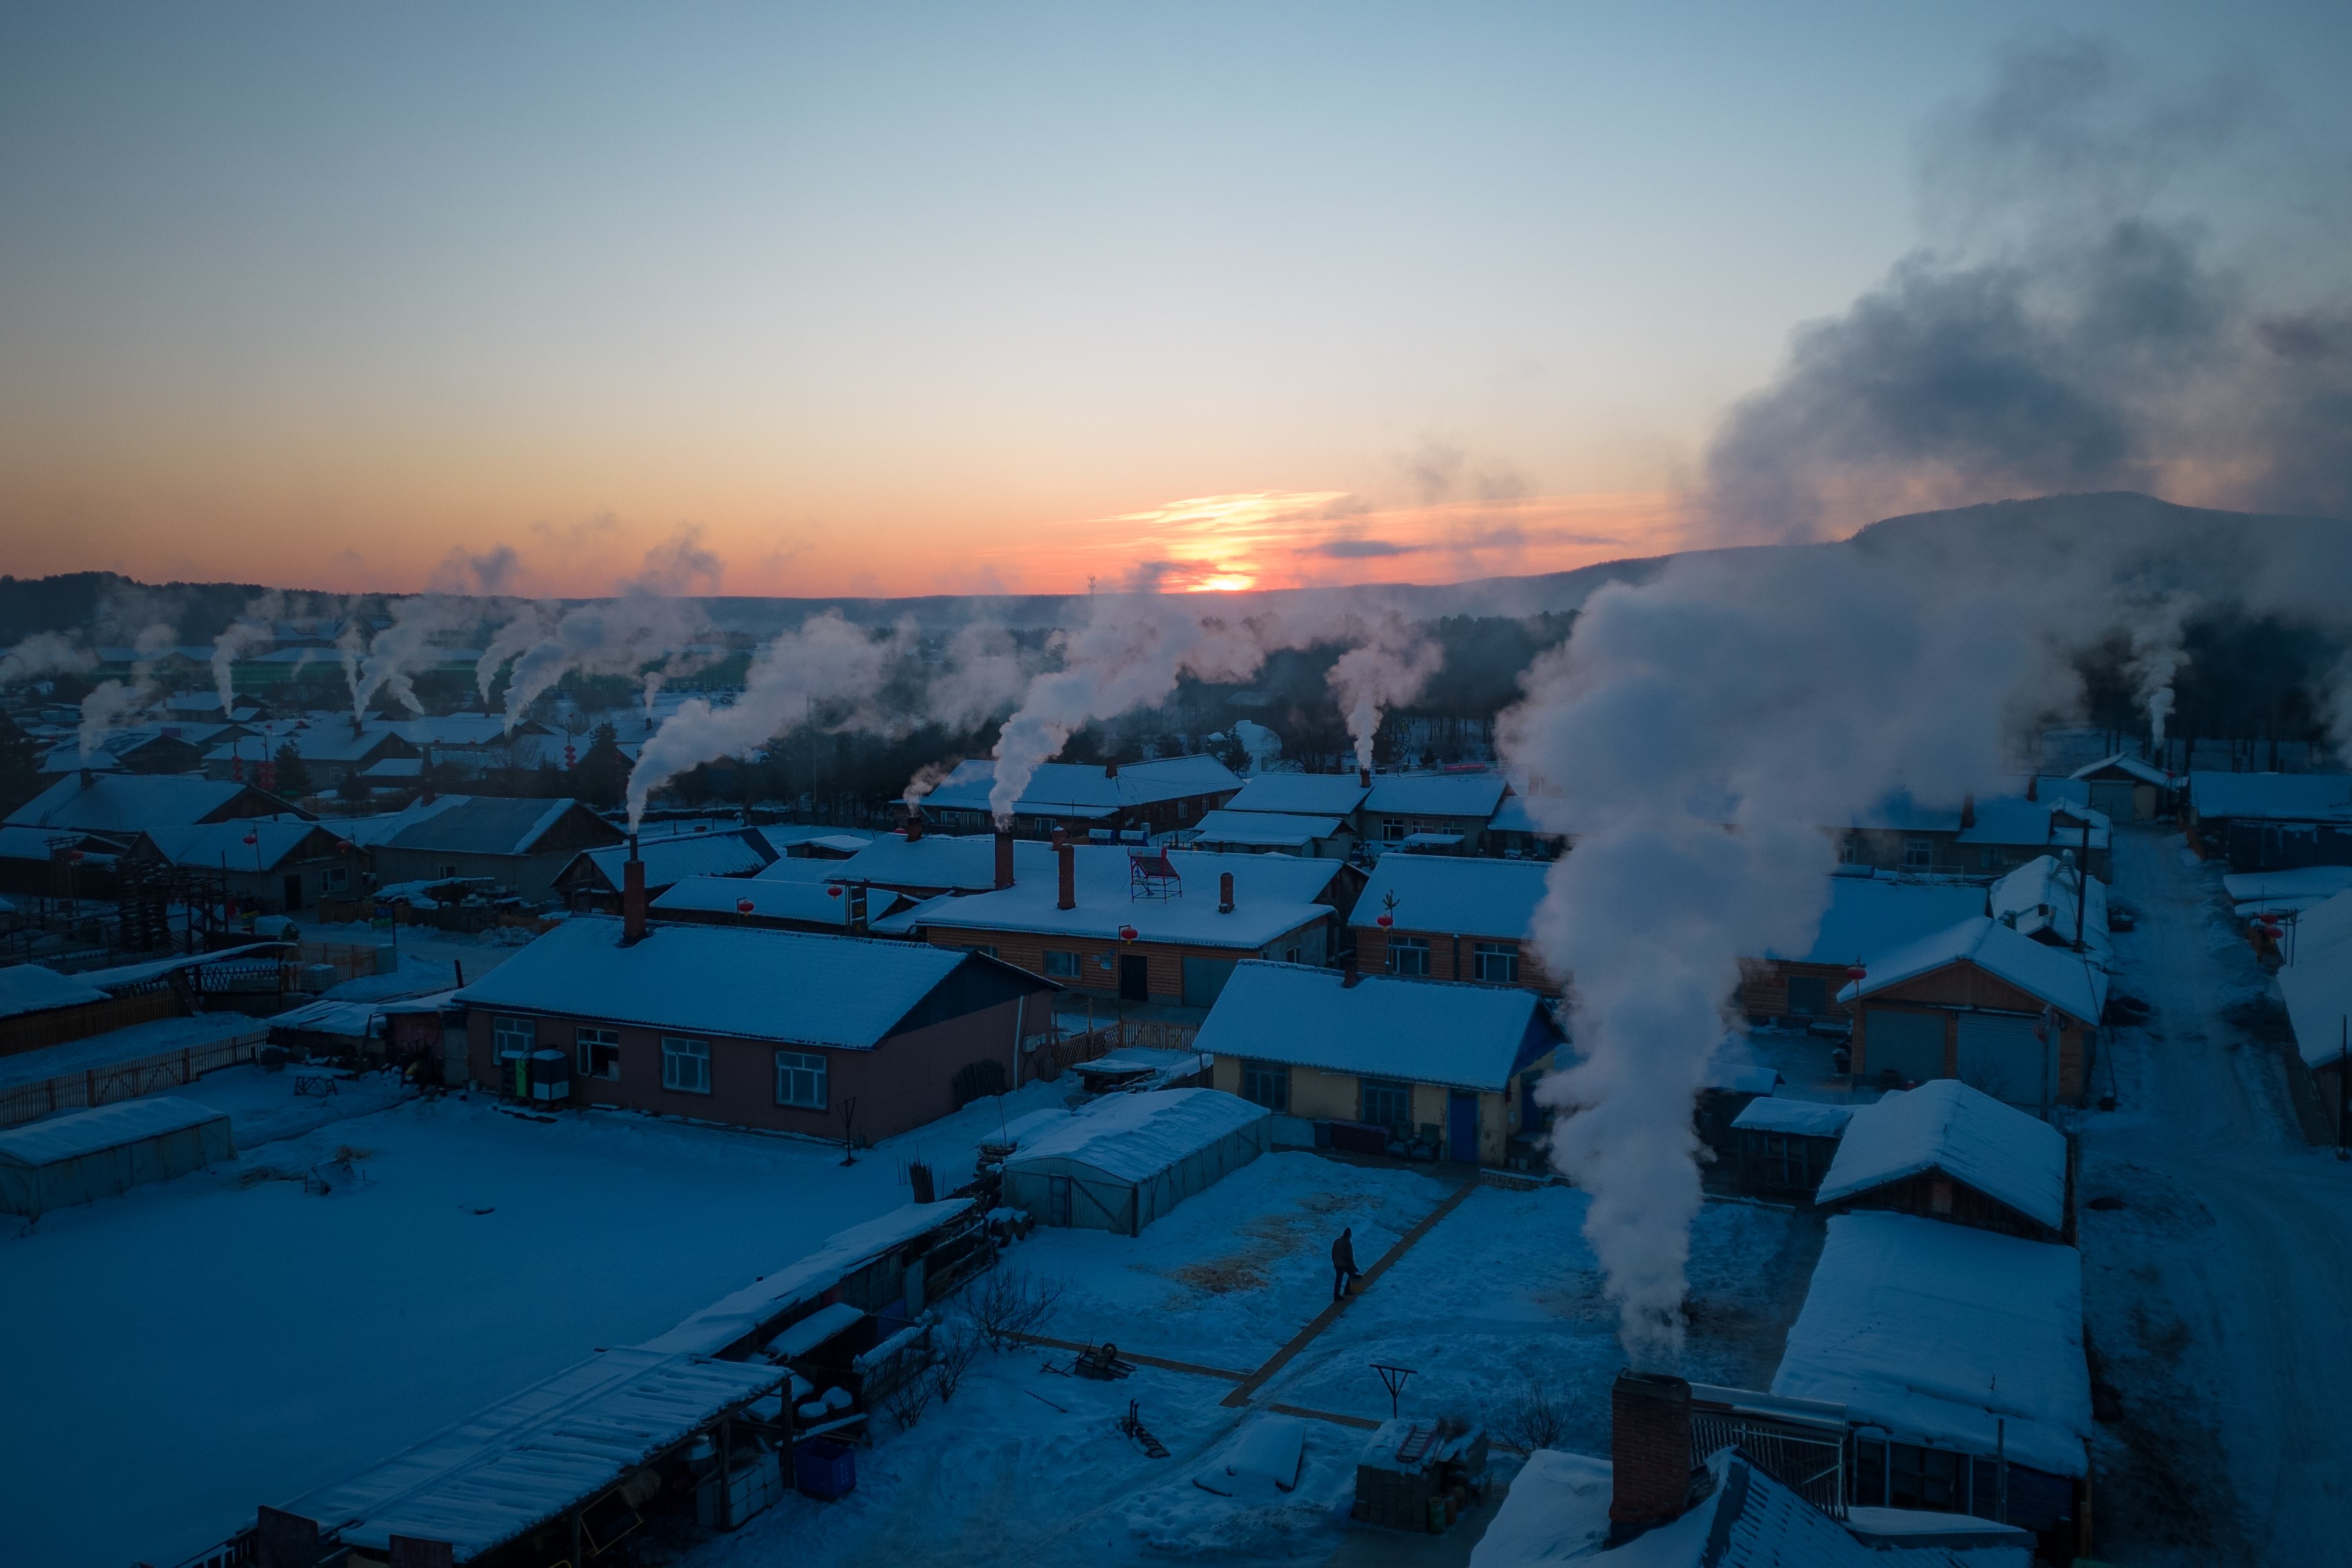 An early morning view of Beiji Village in Mohe, northeast China's Heilongjiang Province, on Jan. 8, 2023. (Zhang Tao—Xinhua/Getty Images)